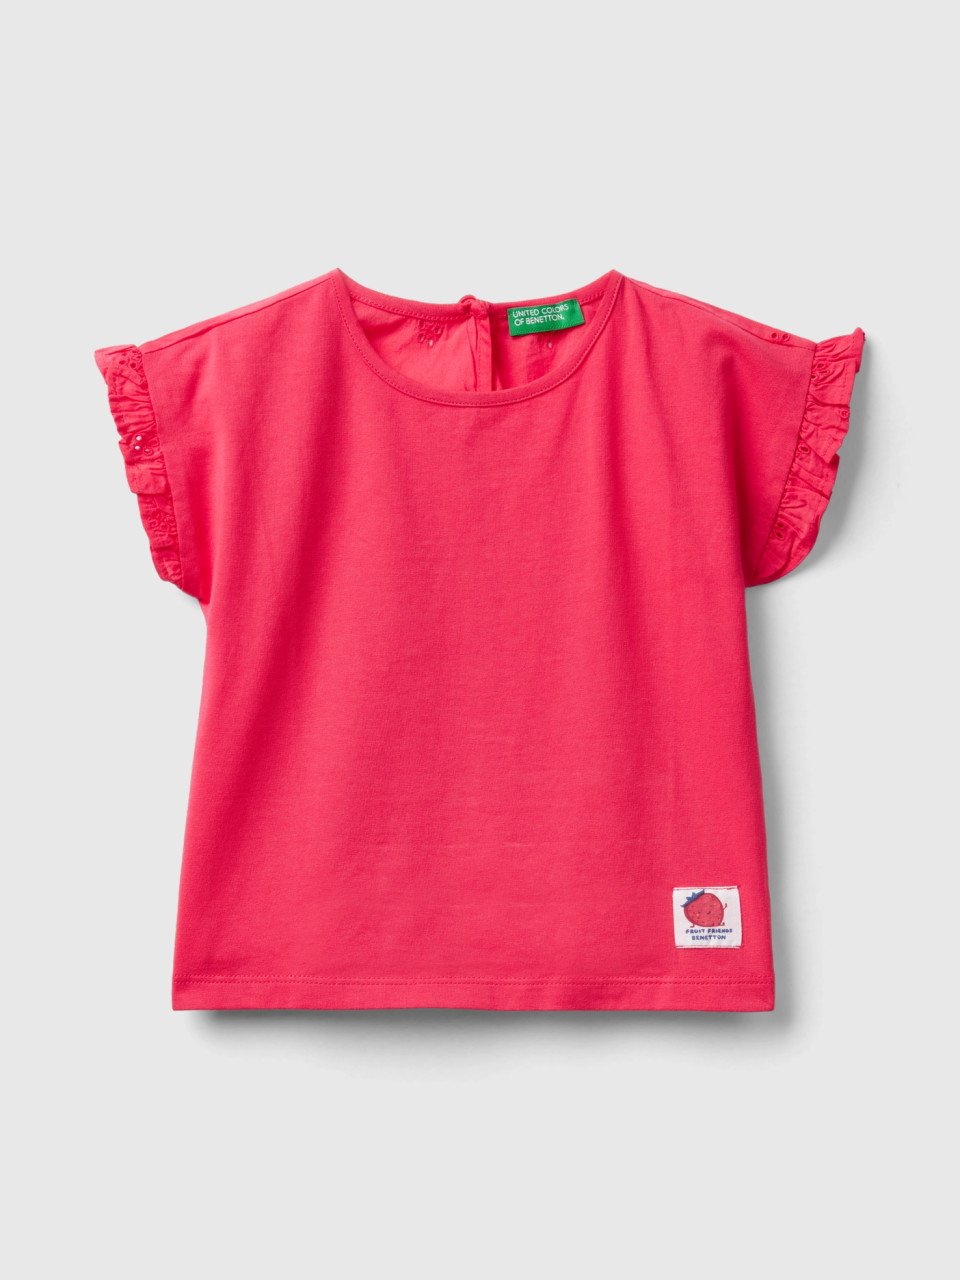 Benetton, T-shirt With Rouches And Broderie Anglaise Embroidery, Fuchsia, Kids